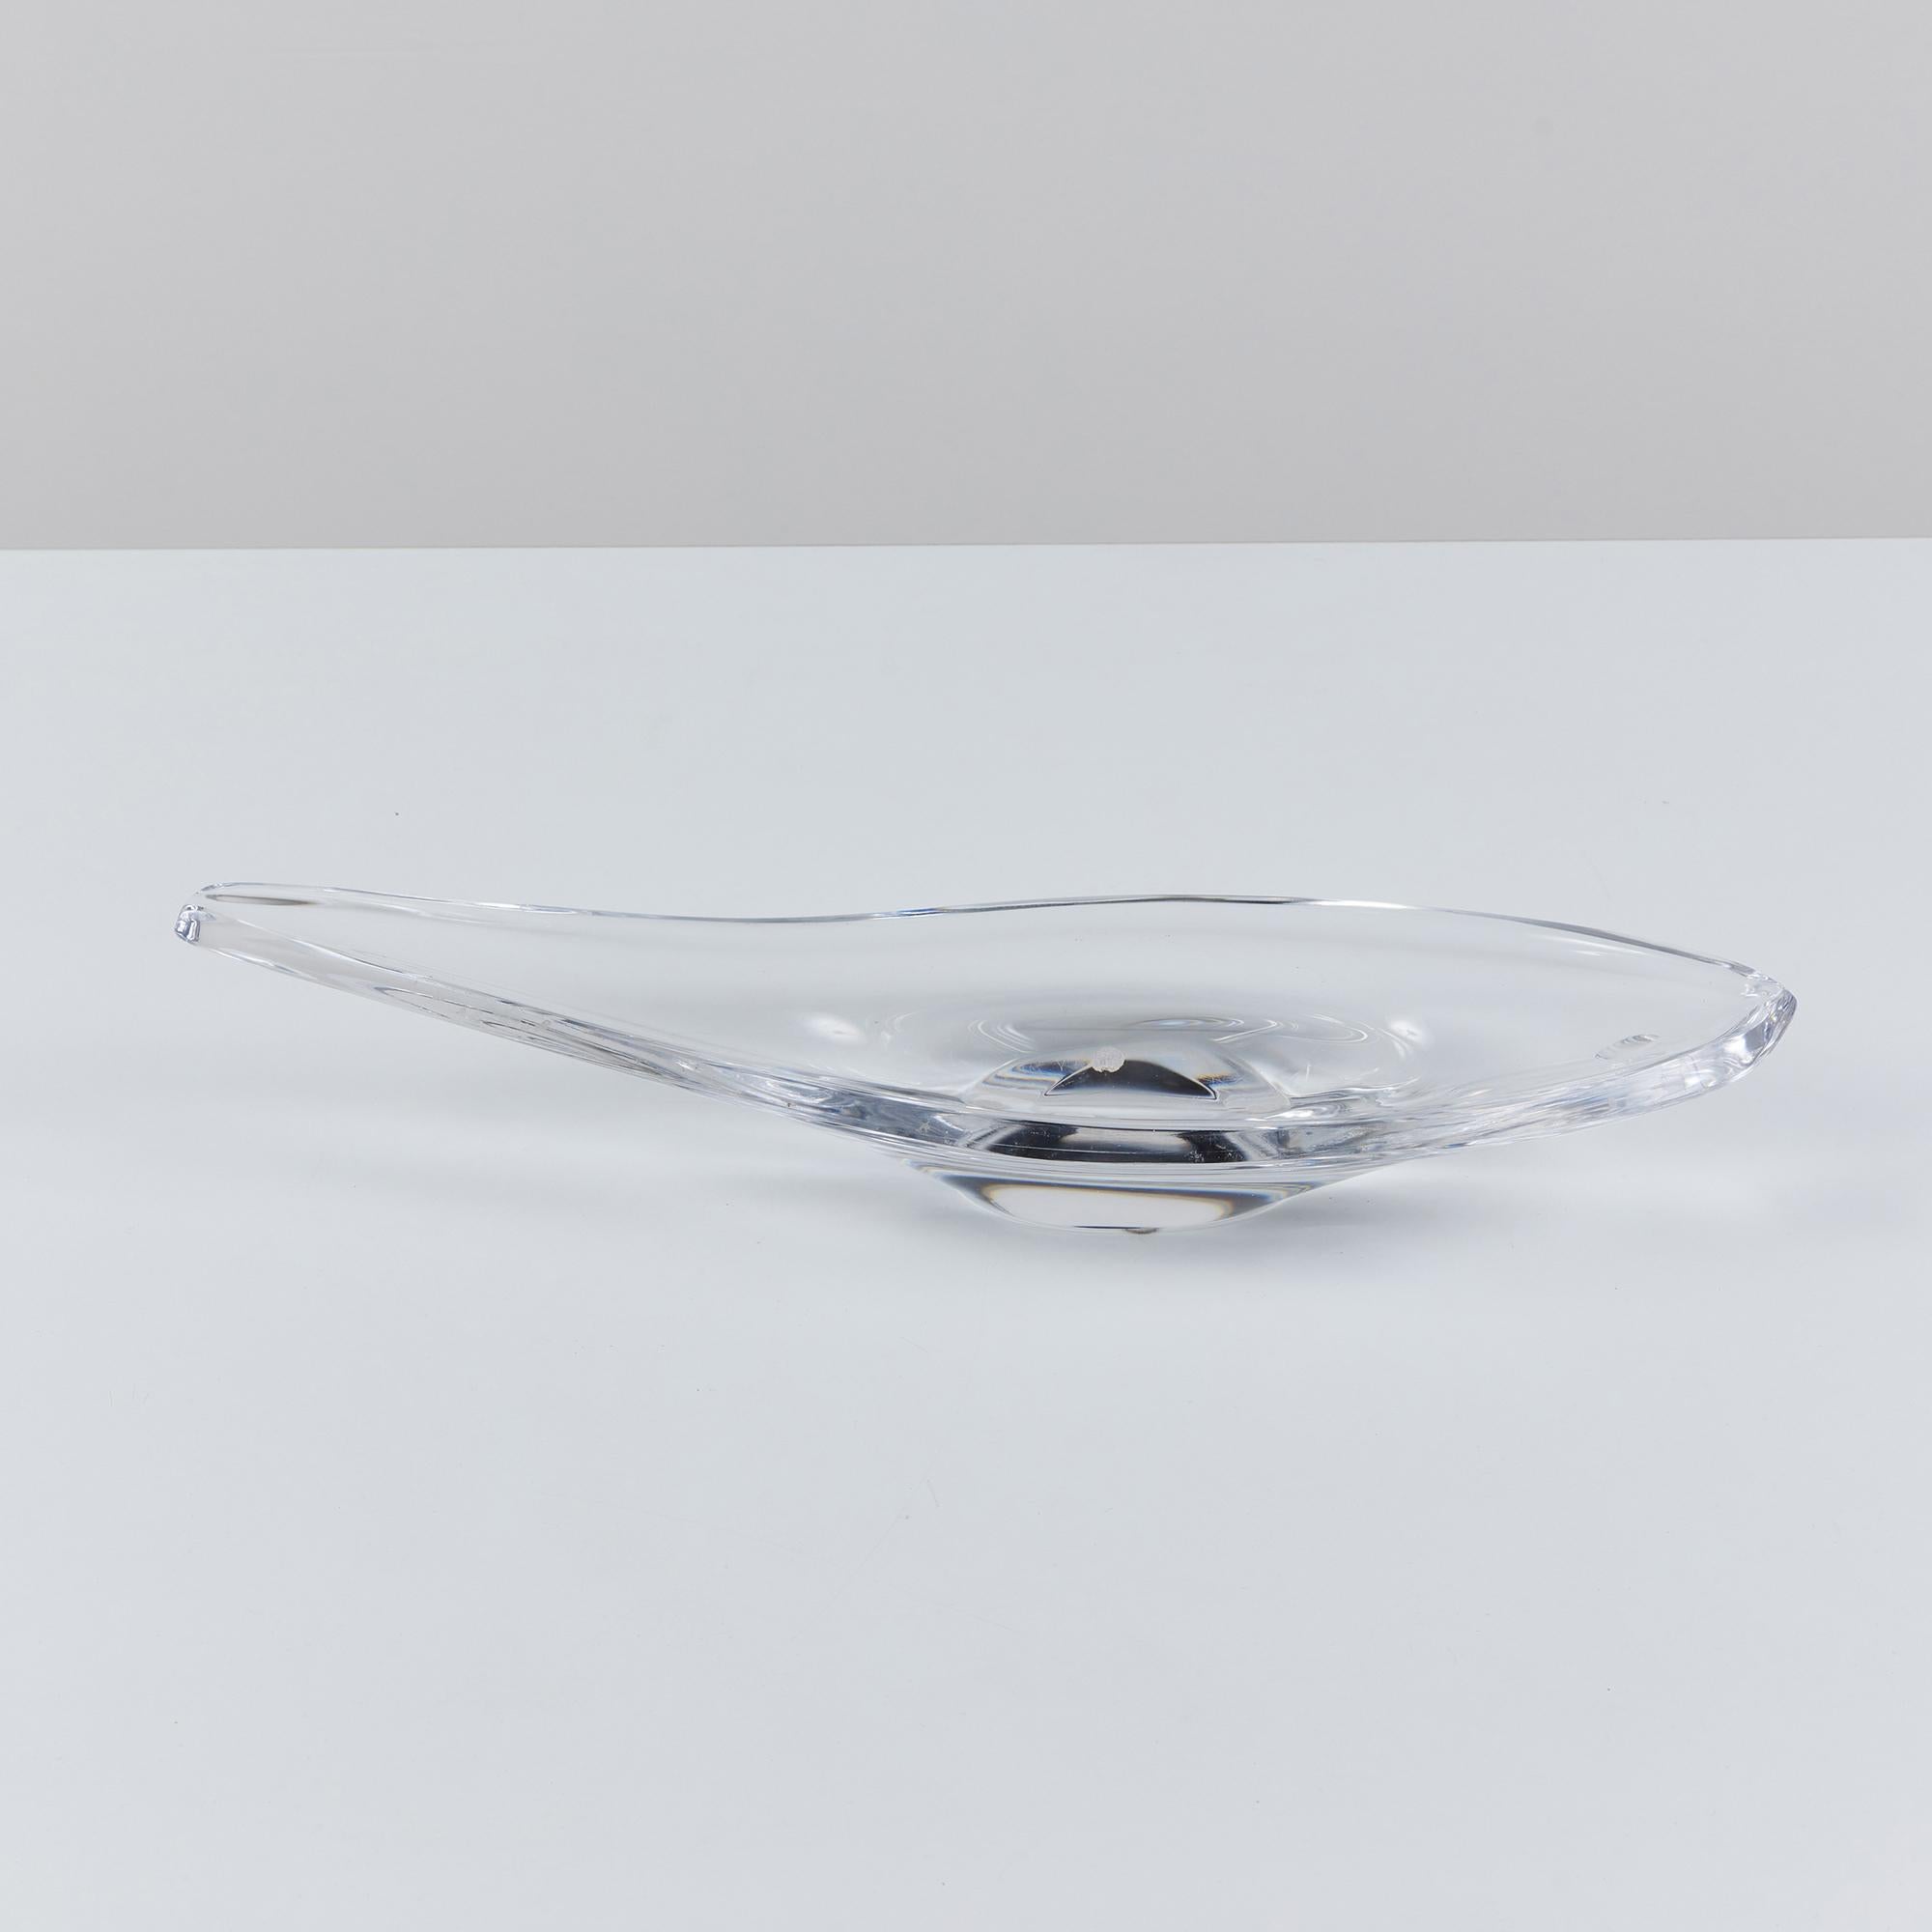 Glass bowl by Vicke Lindstrand for Kosta Boda, Sweden. The dish features a sleek body that tapers at the edges. The dish, which resembles a fish has a round circular 